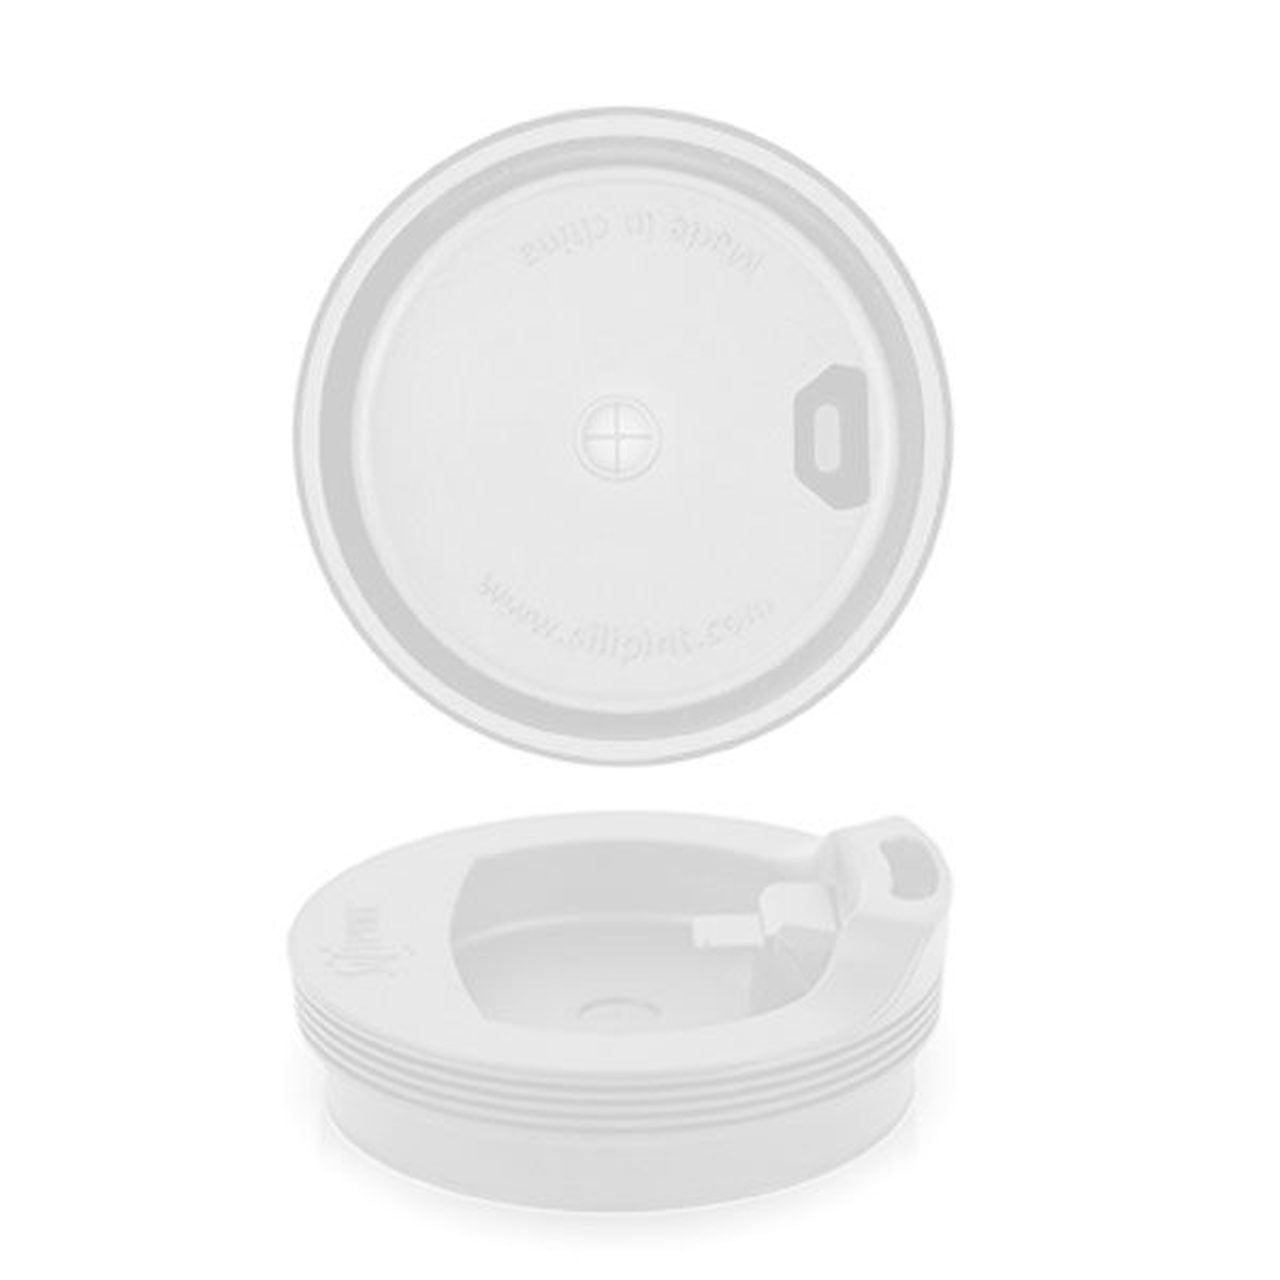 top and side view of white cup lid on white background.